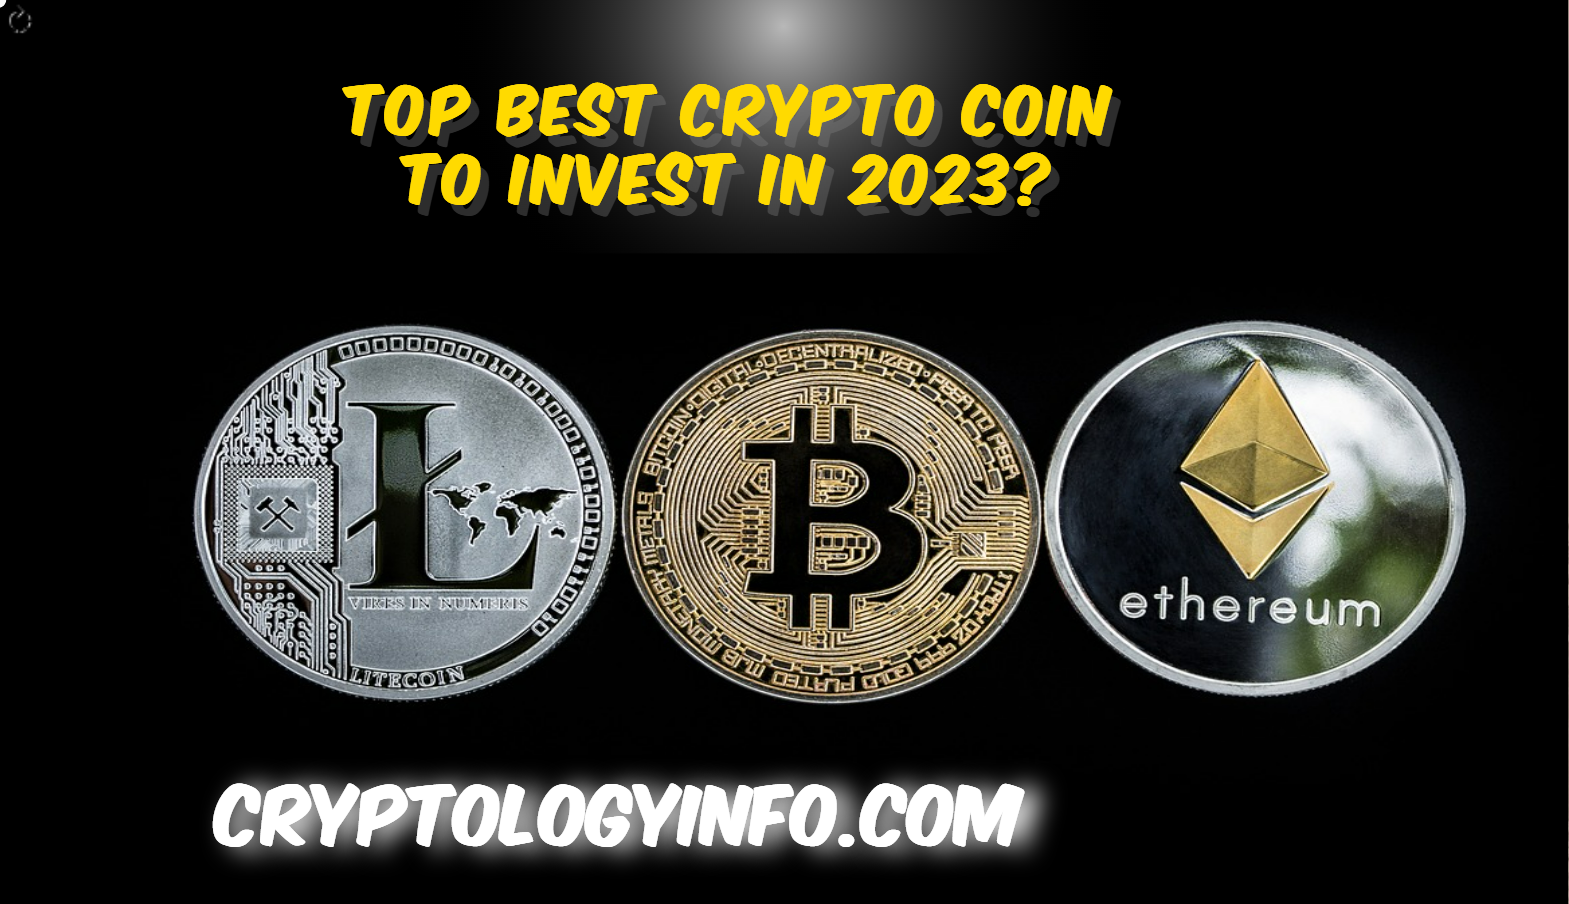 Top Best Crypto Coin to Invest in 2023?